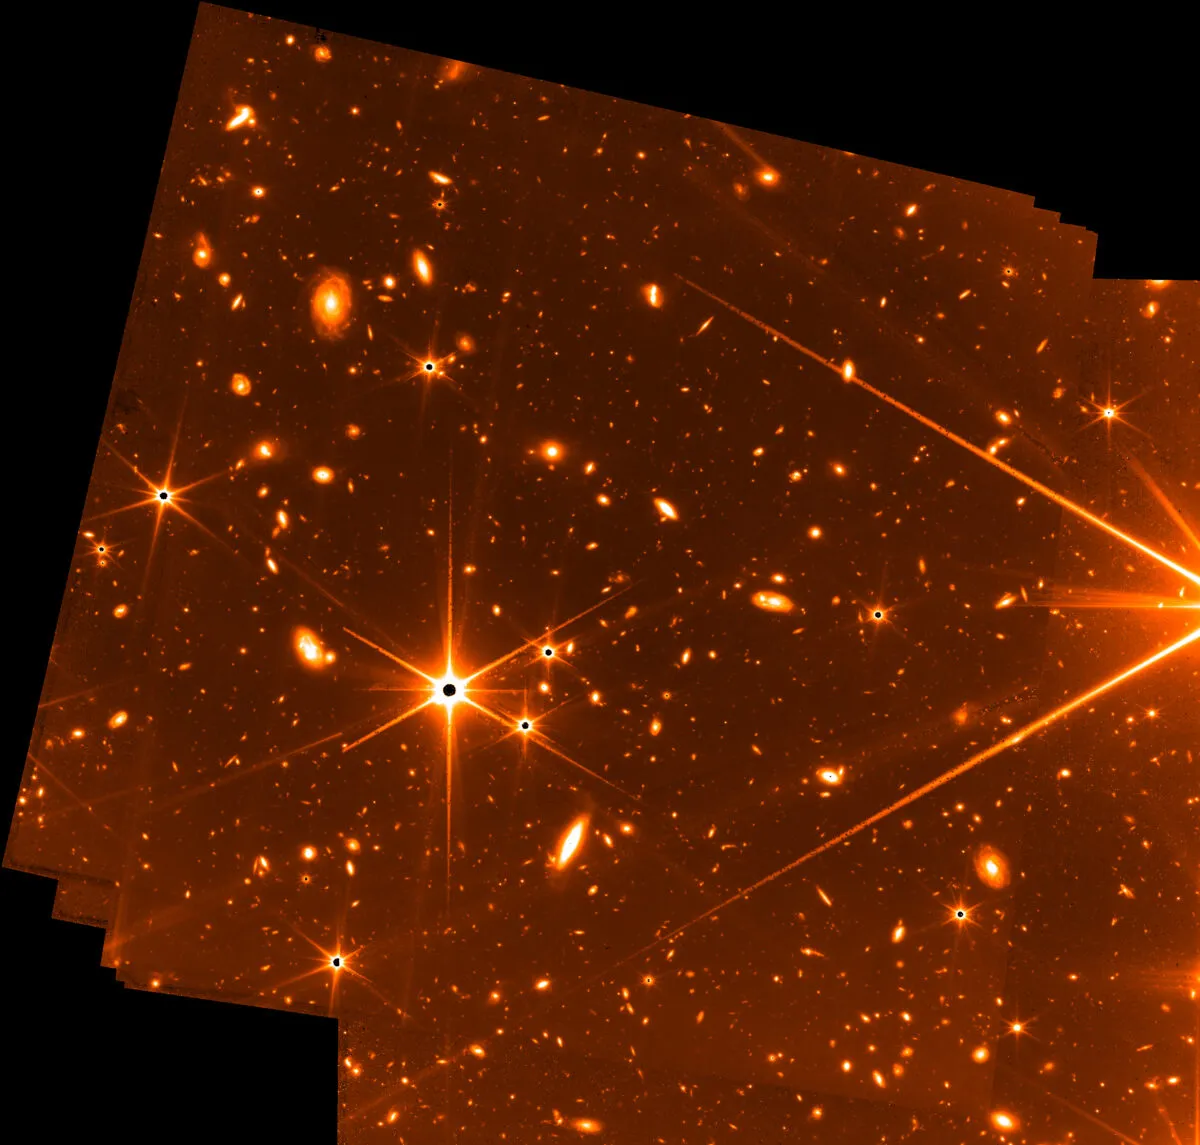 A view of stars and galaxies captured by James Webb Space Telescope's Fine Guidance Sensor as part of a thermal stability test in mid-May 2022. Credit: NASA, CSA, and FGS team